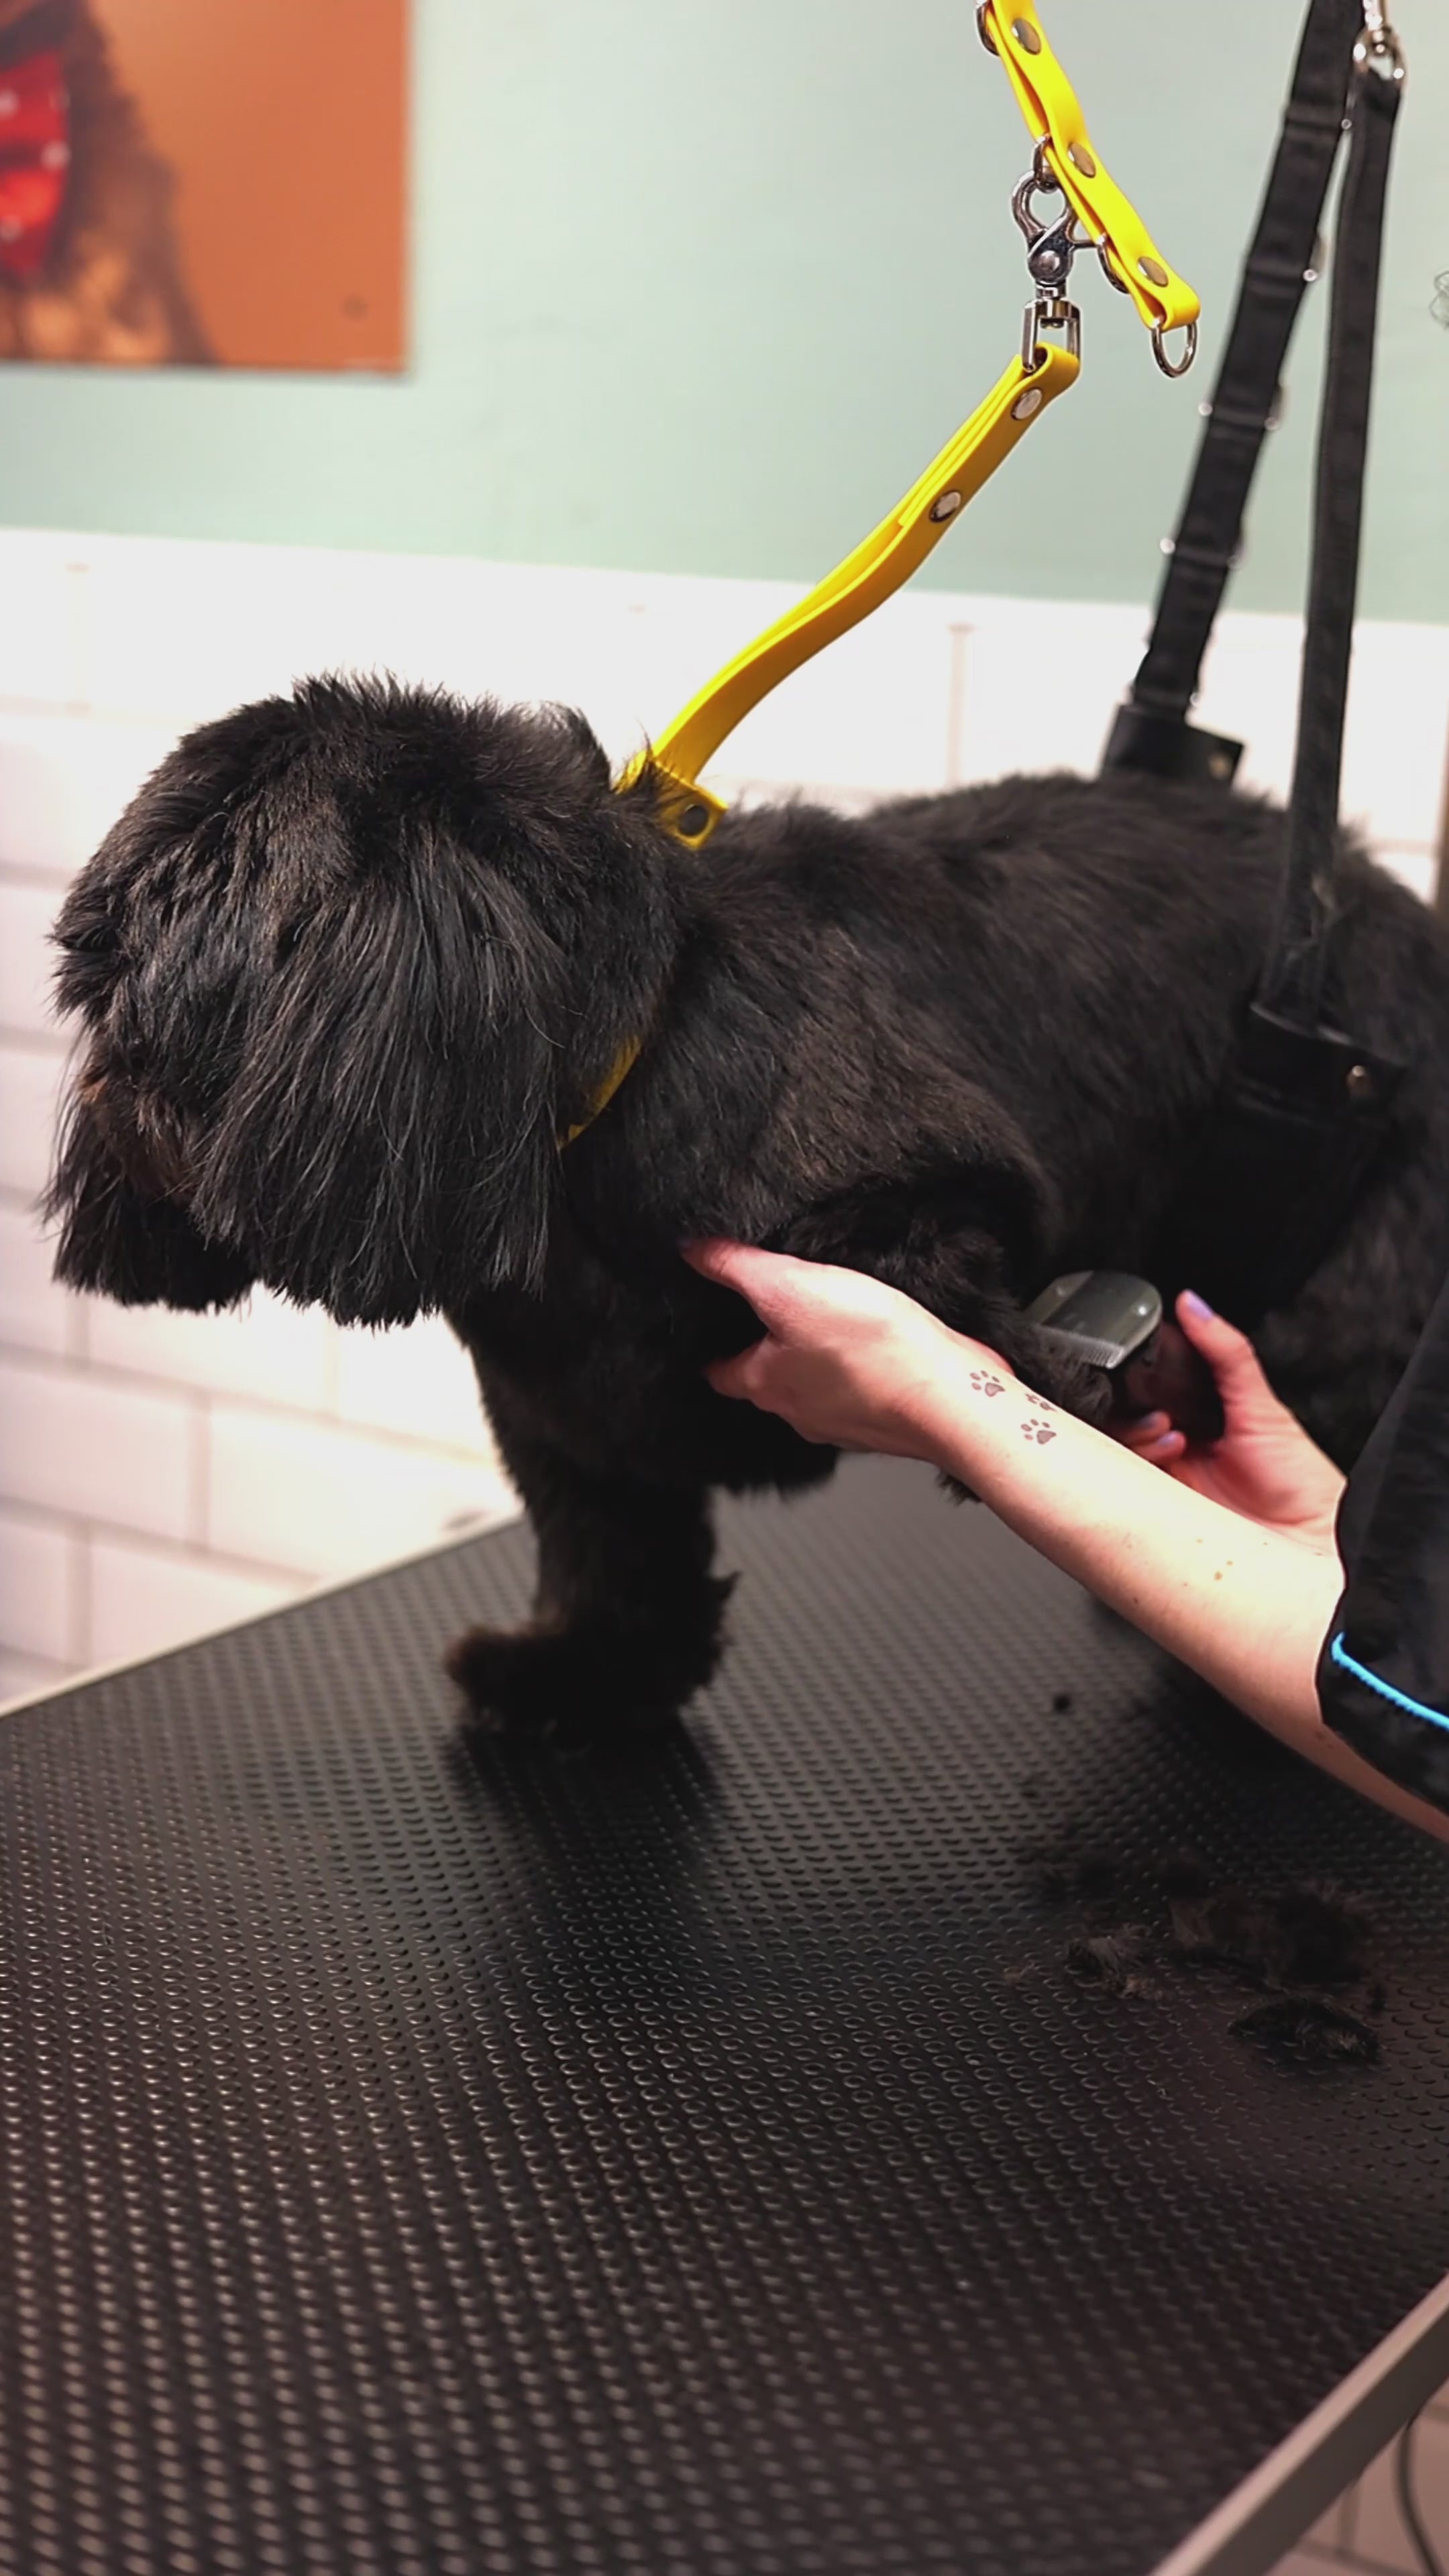 Load video: A video of a black small dog being groomed at Charlie + Co Dog Grooming Salon in Nantwich, Cheshire.